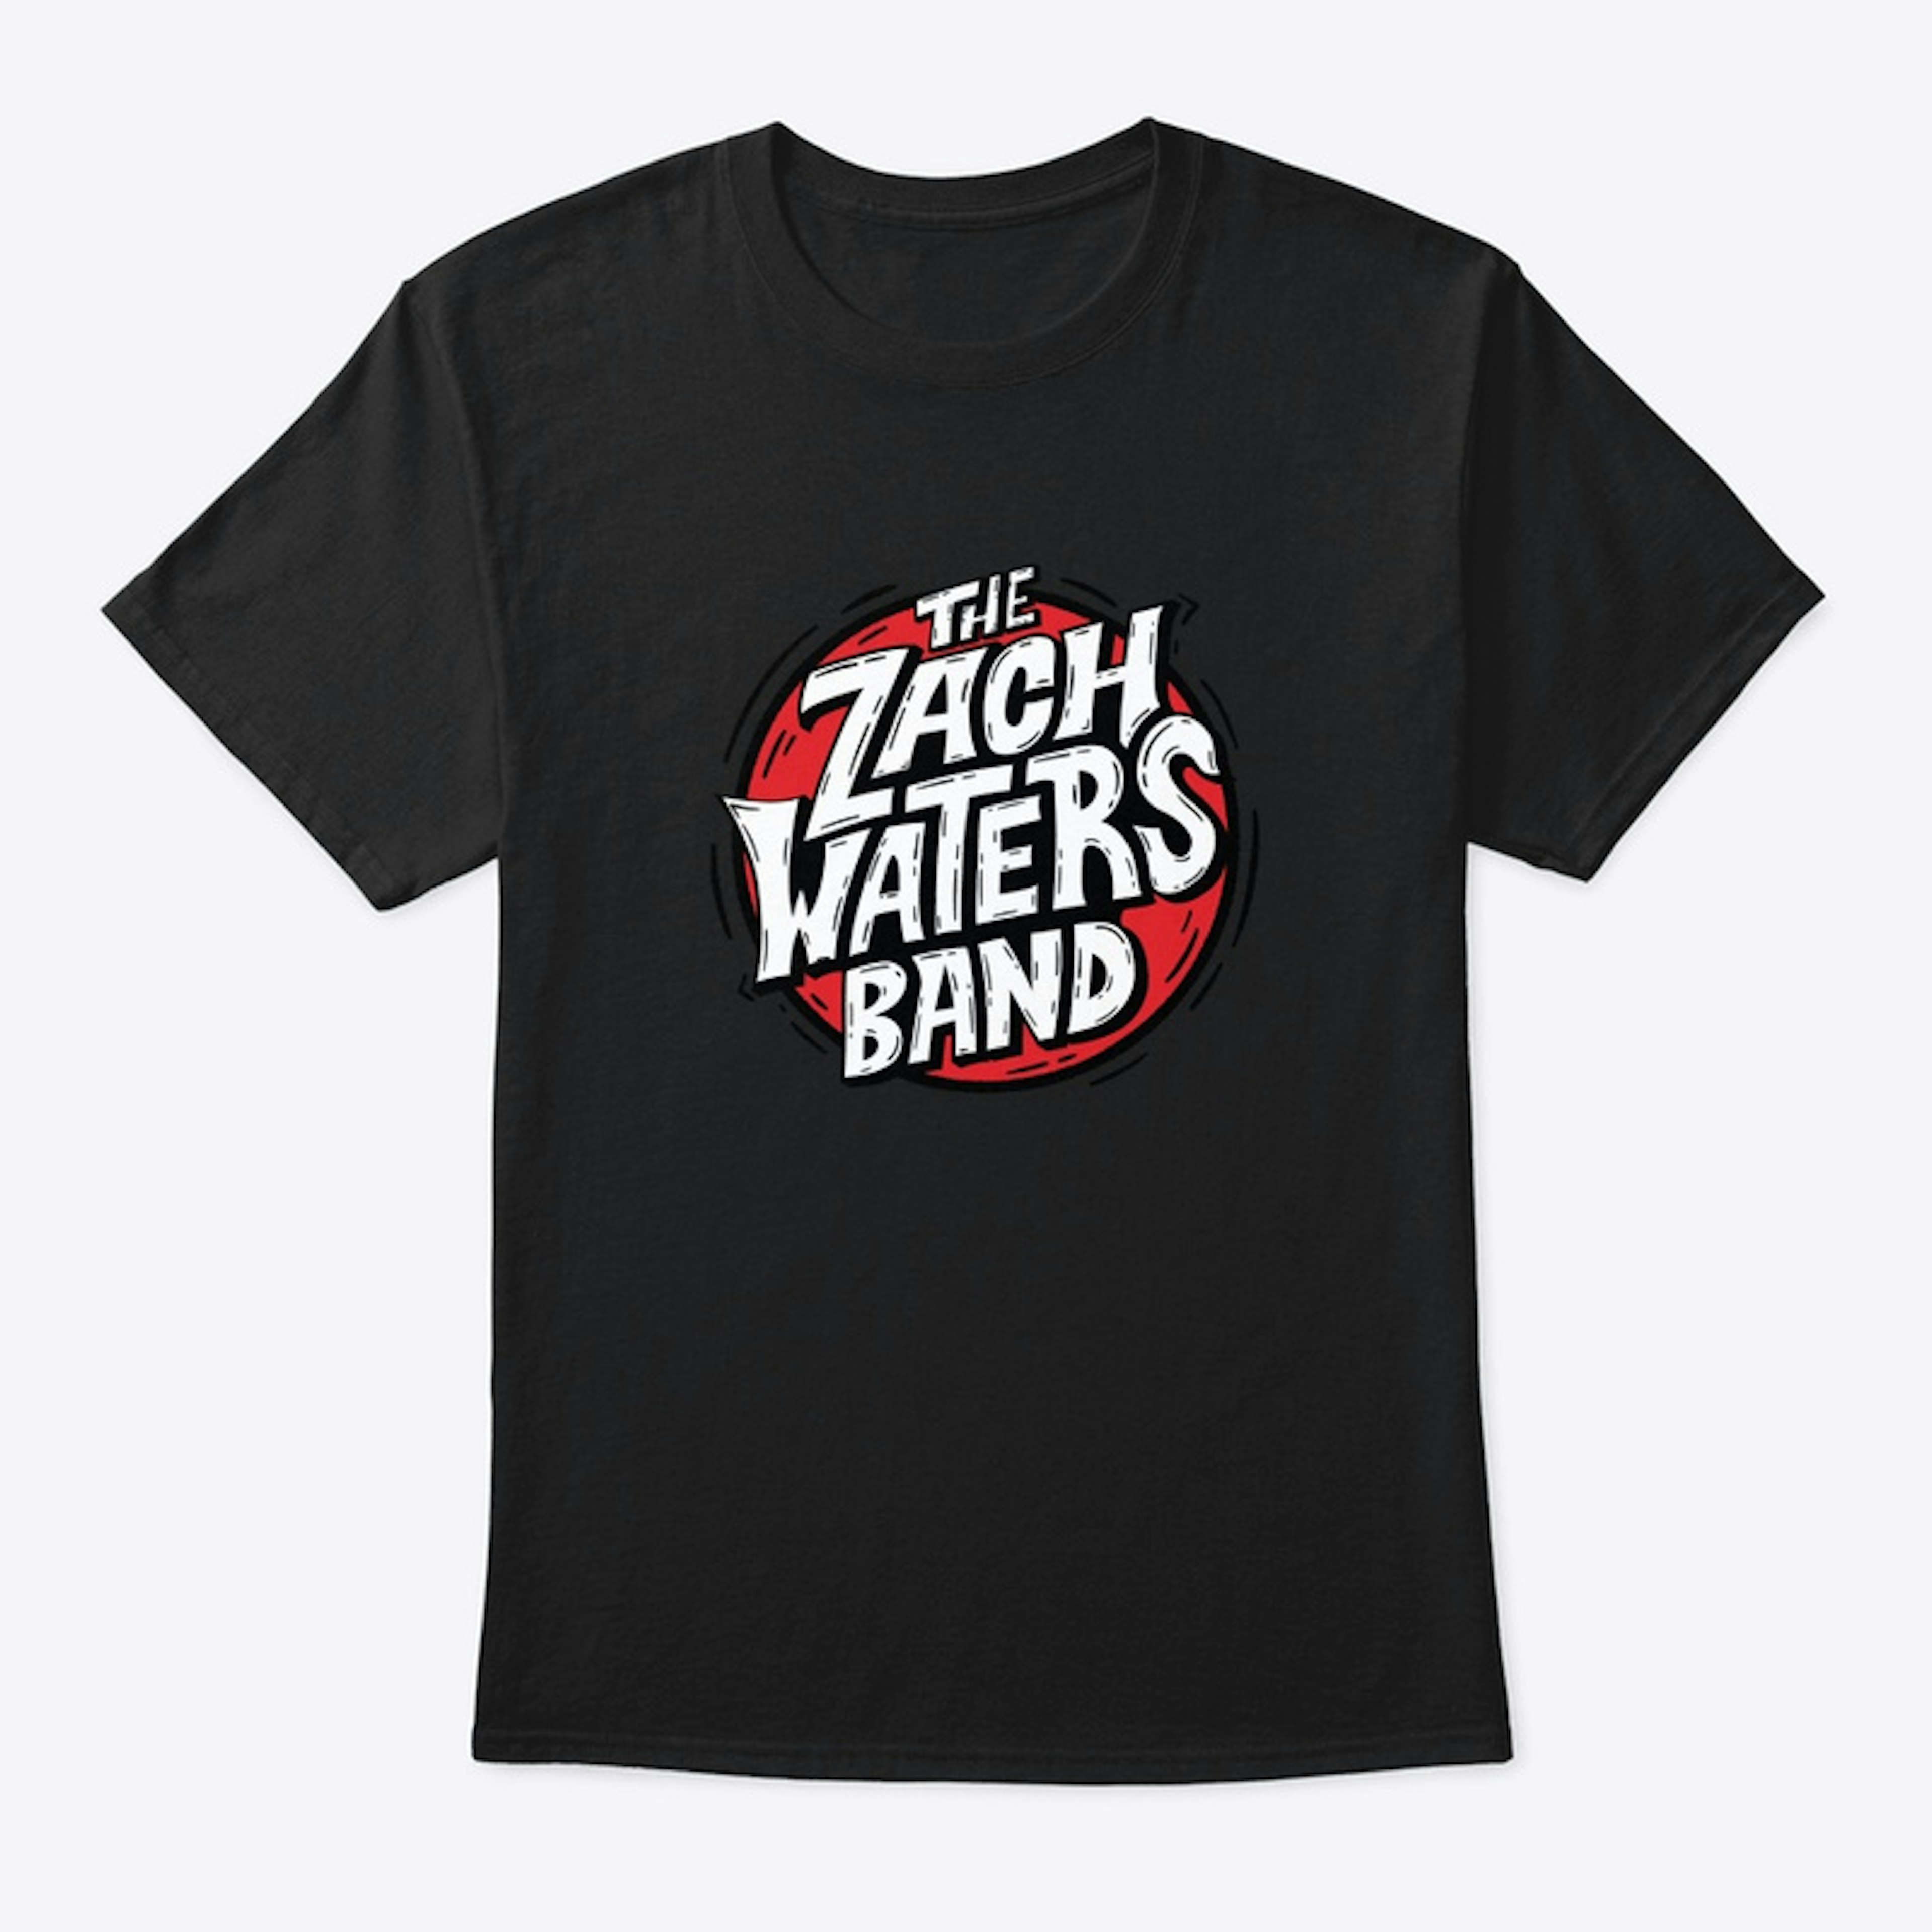 Zach Waters Band Logo Collection